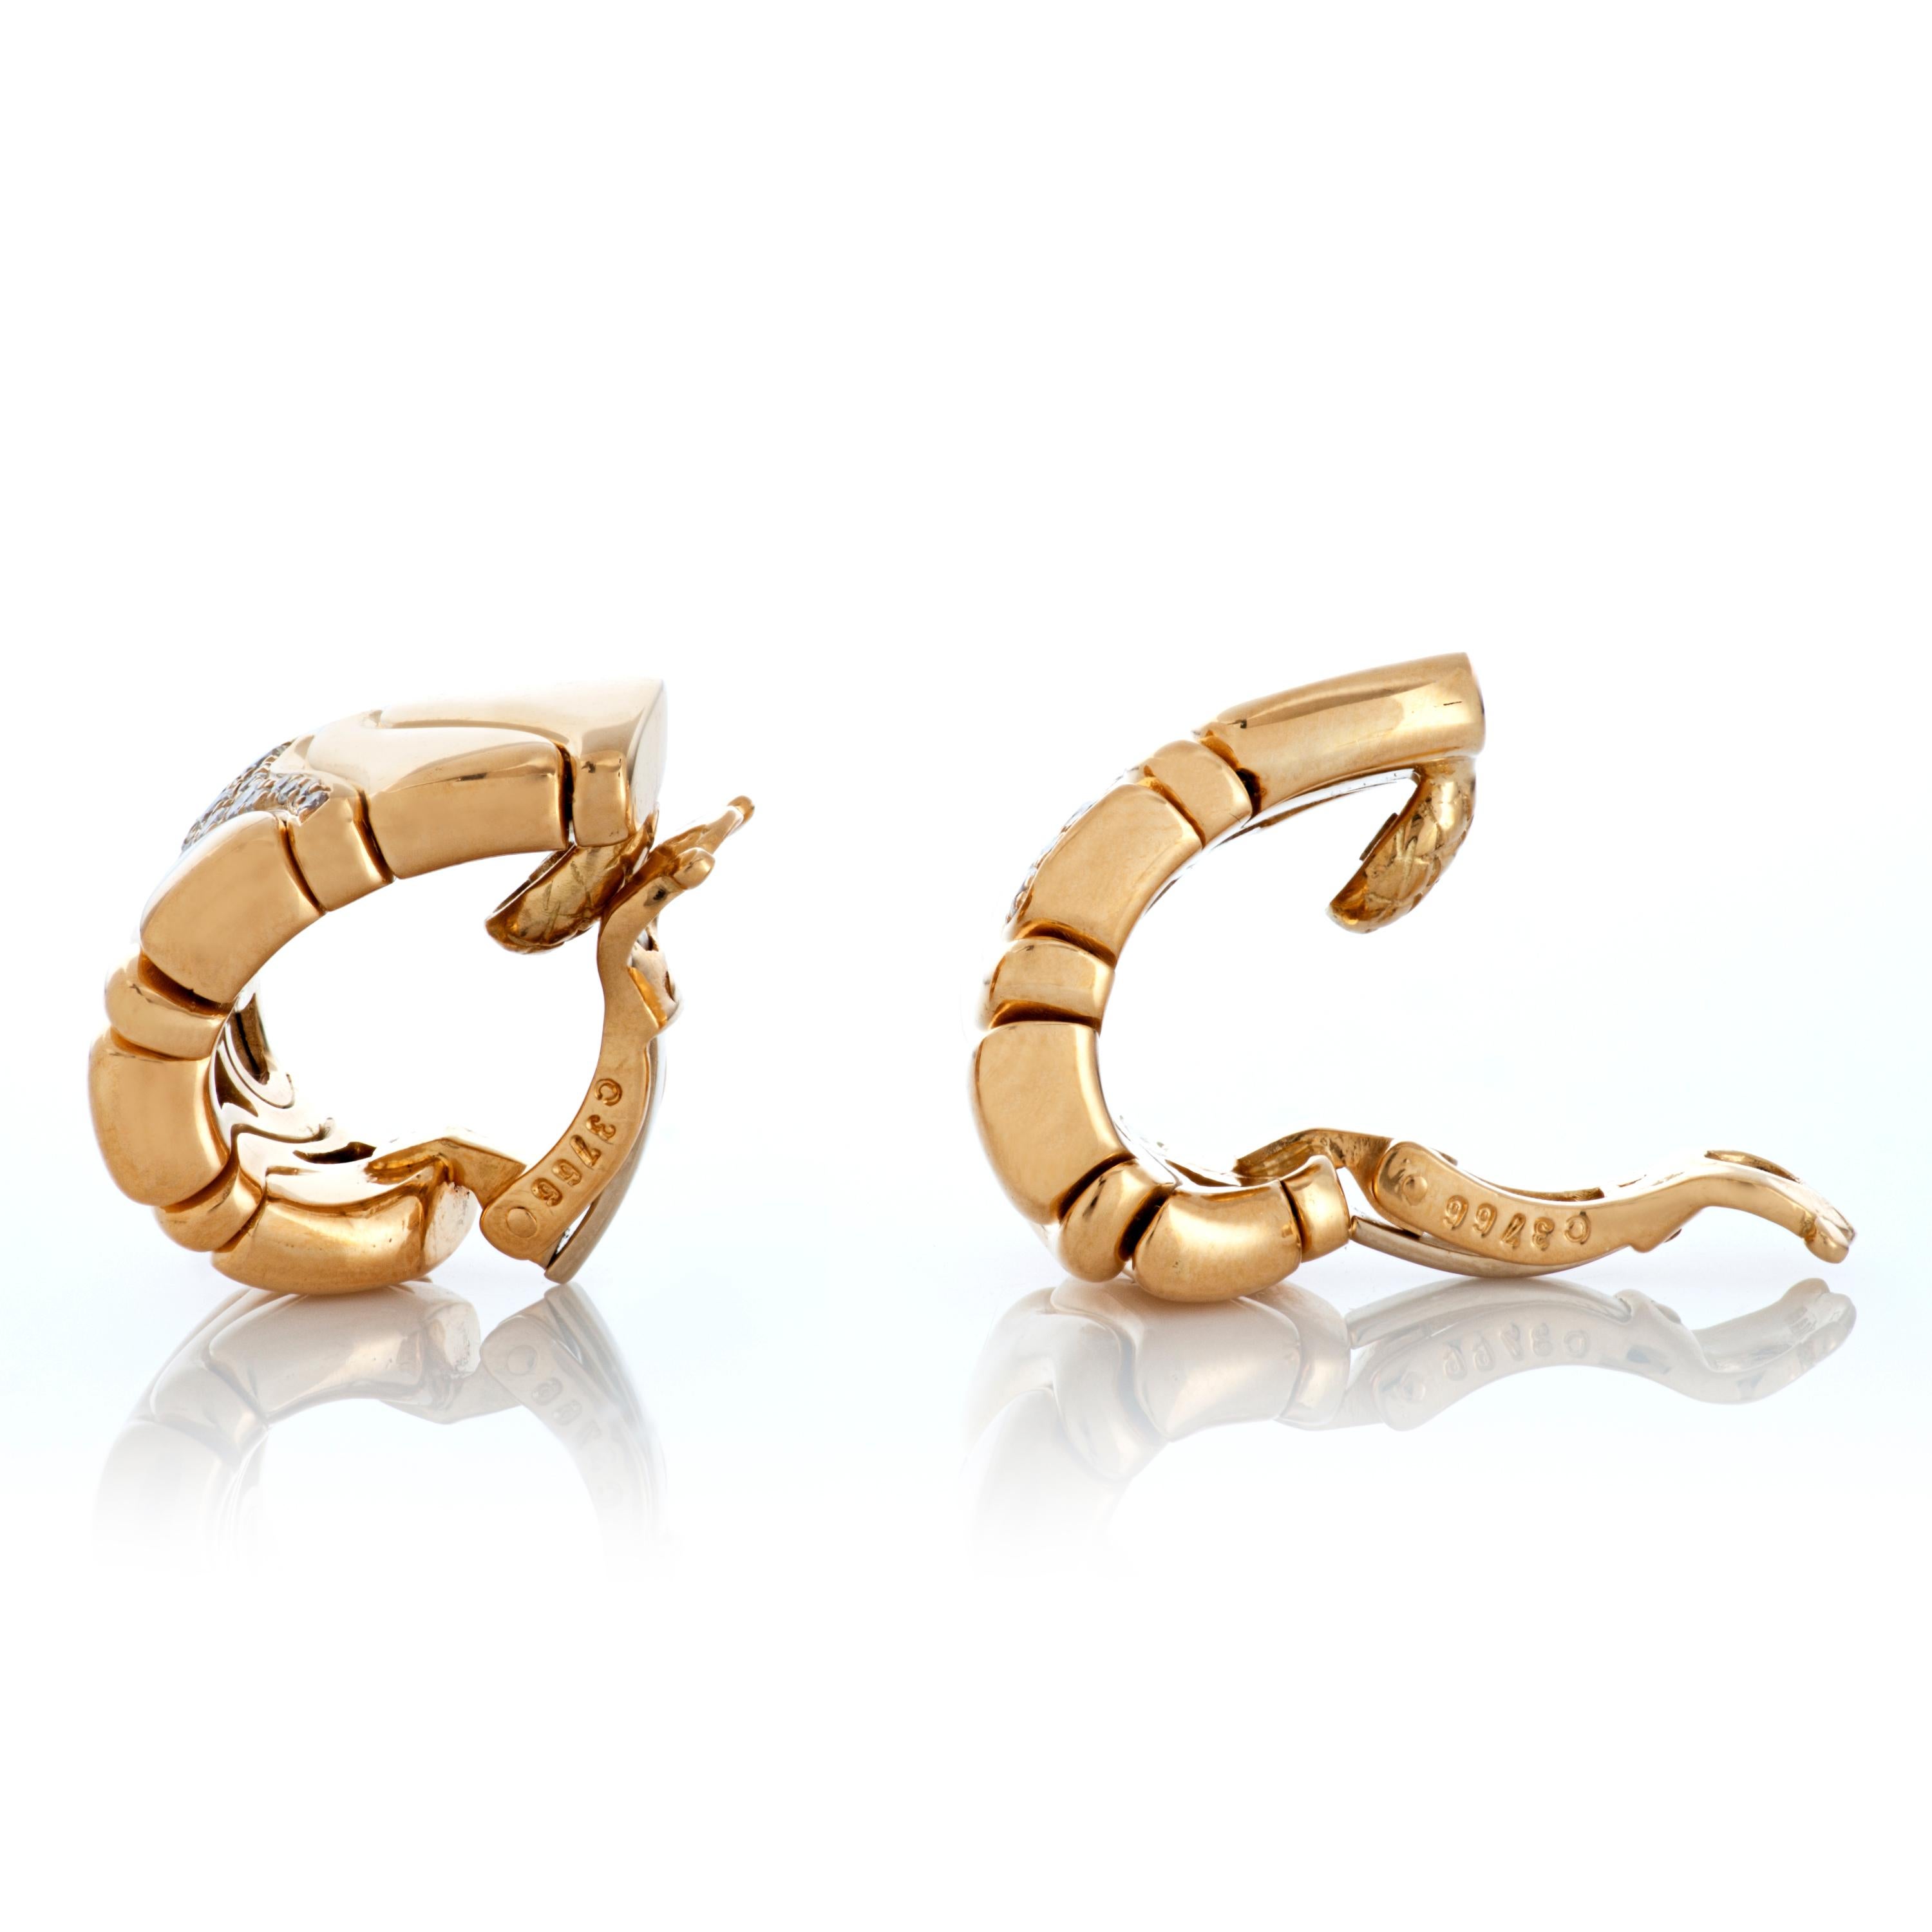 Vintage Marina B. huggie style diamond ear clips in 18k yellow gold.

These earrings feature 30 round brilliant cut diamonds totaling approximately 0.50 carats with F-G color and VS clarity.  45.8 grams.  

They measure approximately 0.50